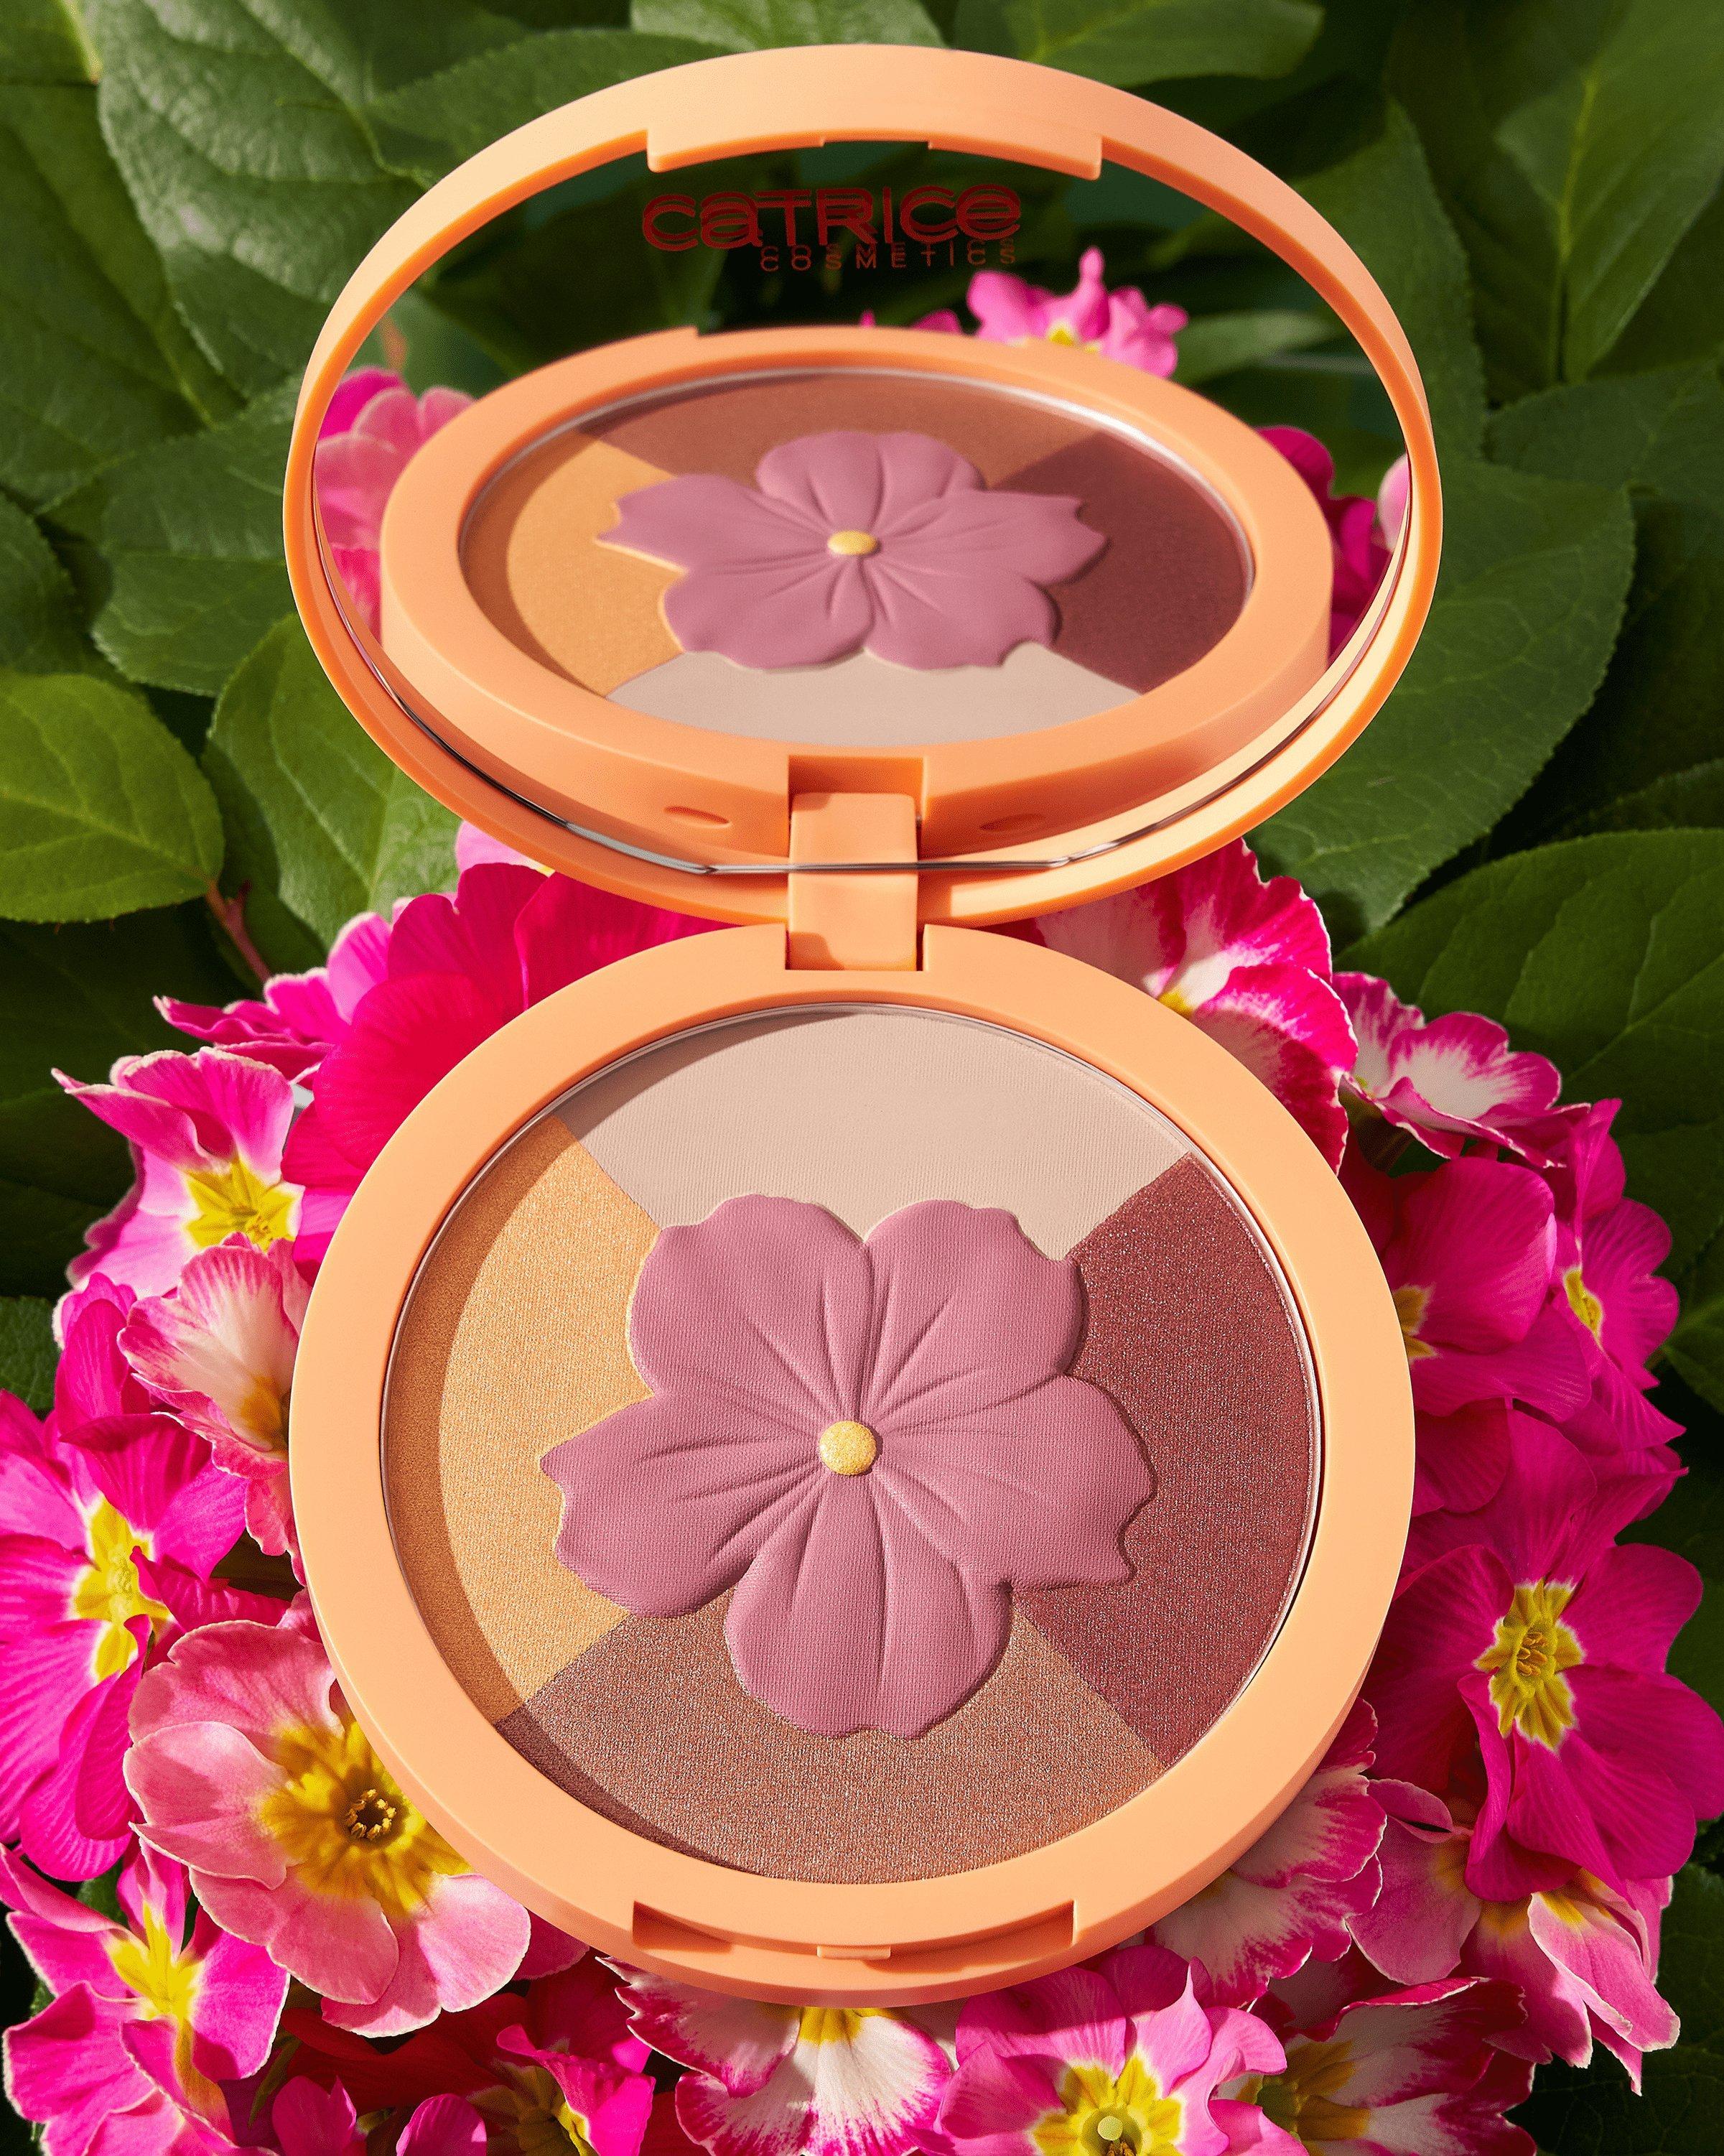 Catrice Seeking Flowers hydraterende crème-tot-poeder highlighter